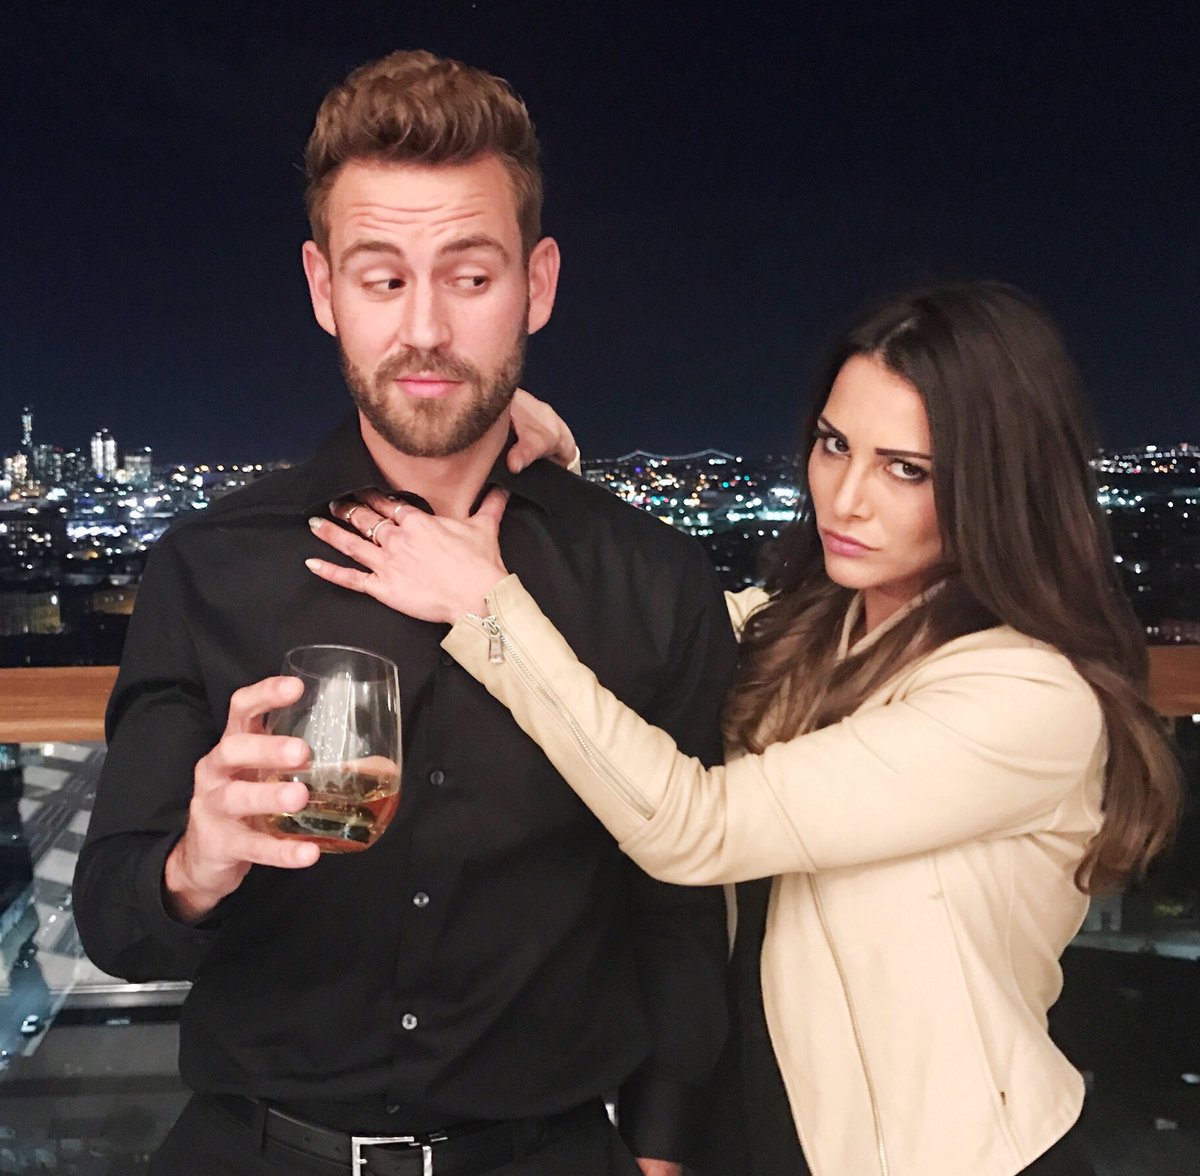 FriendshipGoals -  Nick Viall - Bachelor 21 - Episode 9 Feb 27 - *Sleuthing Spoilers* - Page 2 C5MkfomWcAA6Nrk